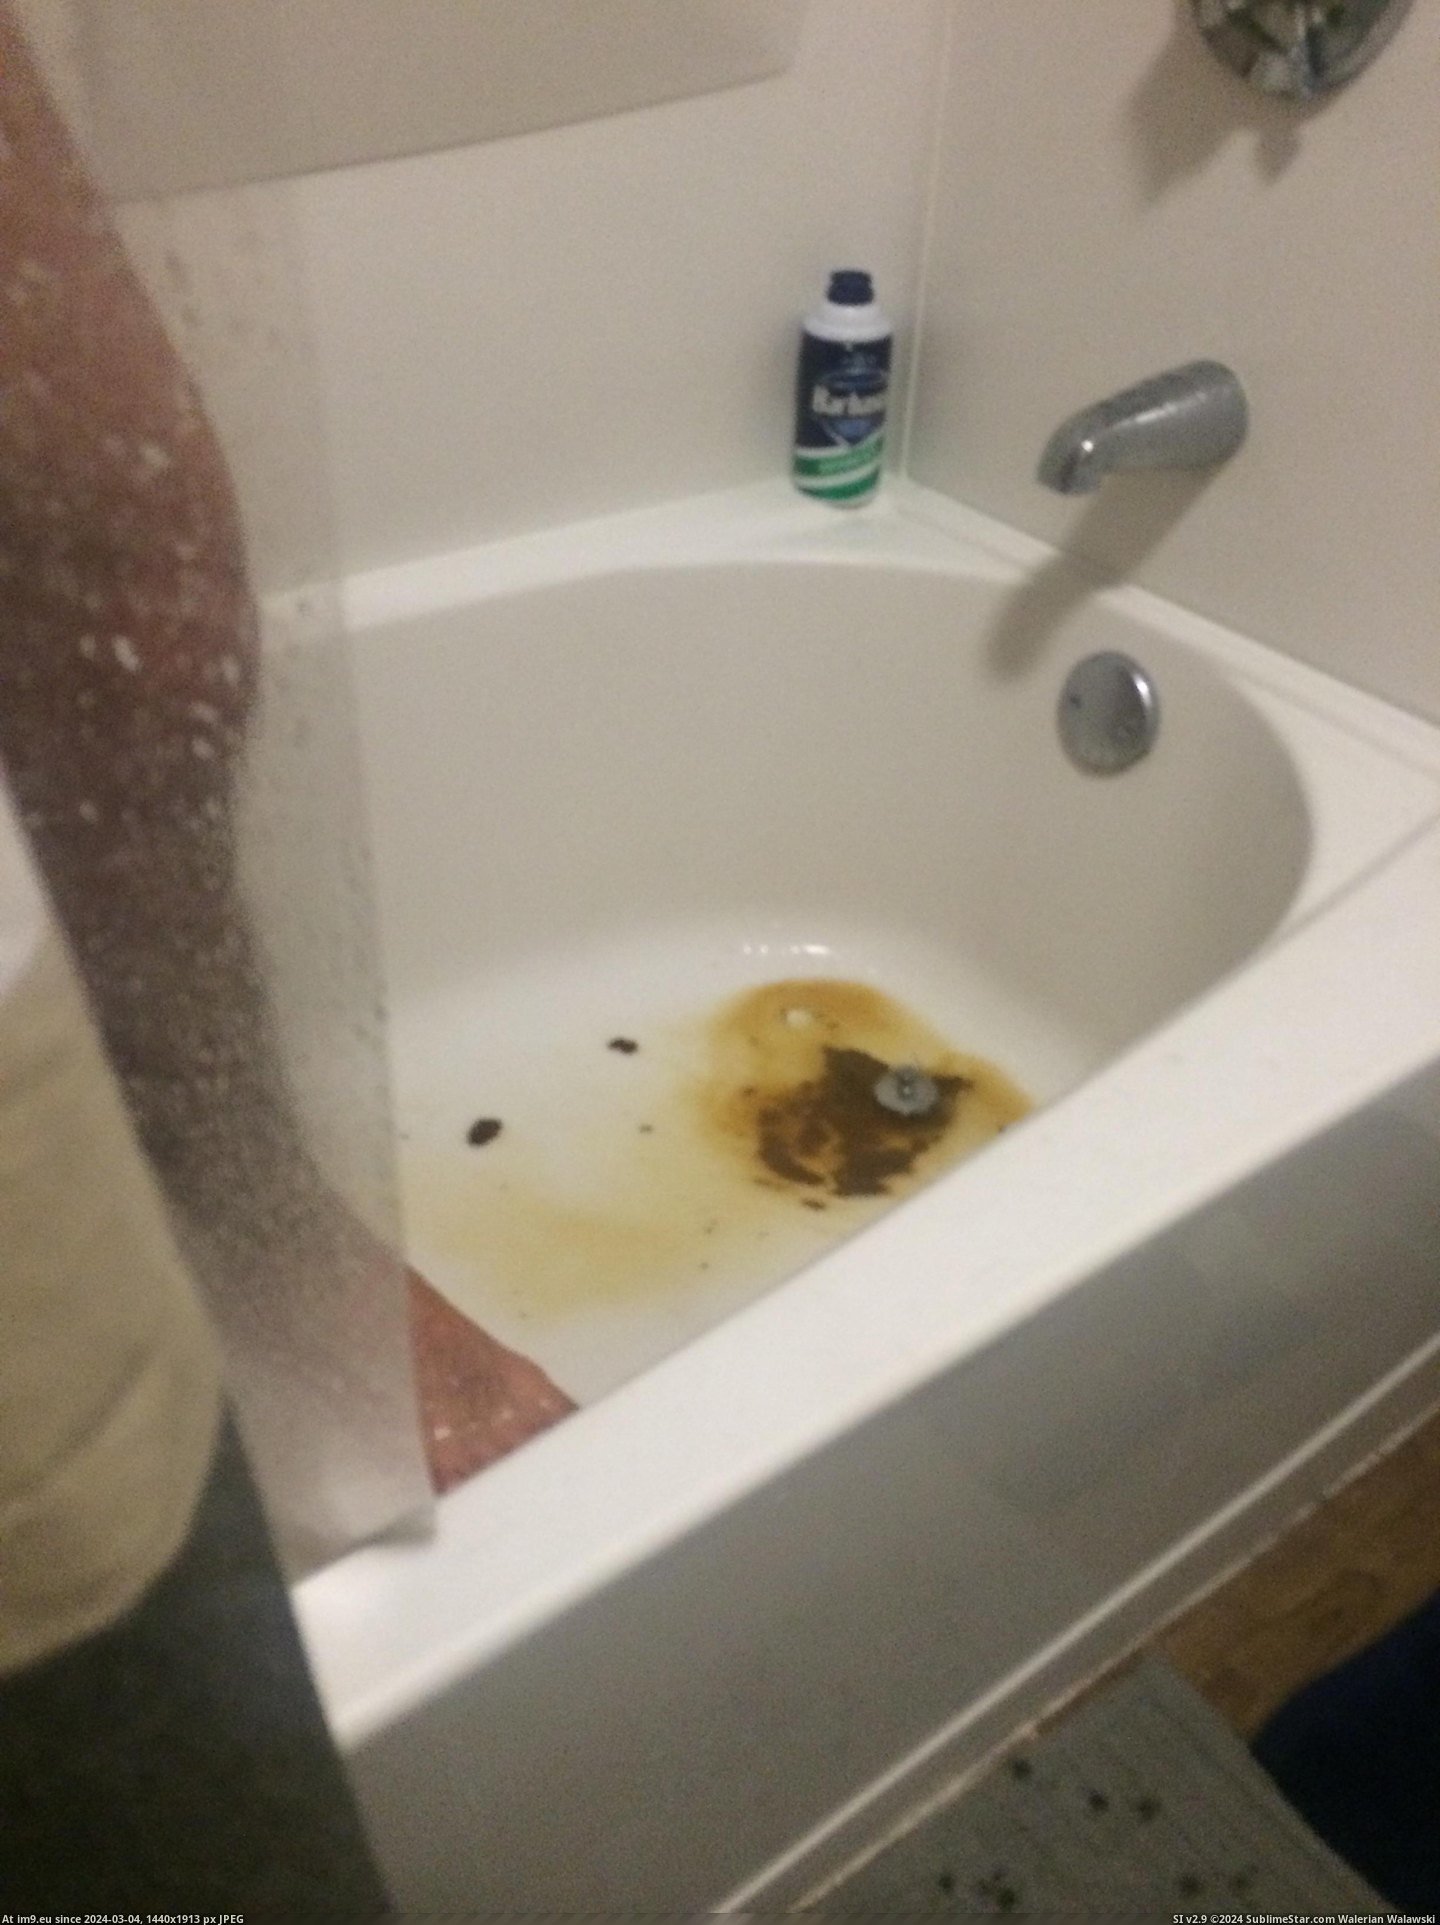 #Wtf #Shower #Shit #Sober #Roomate #Drain #Pushed #Purpose [Wtf] Roomate took a shit in the shower and pushed it down the drain. On purpose. Sober. Pic. (Obraz z album My r/WTF favs))